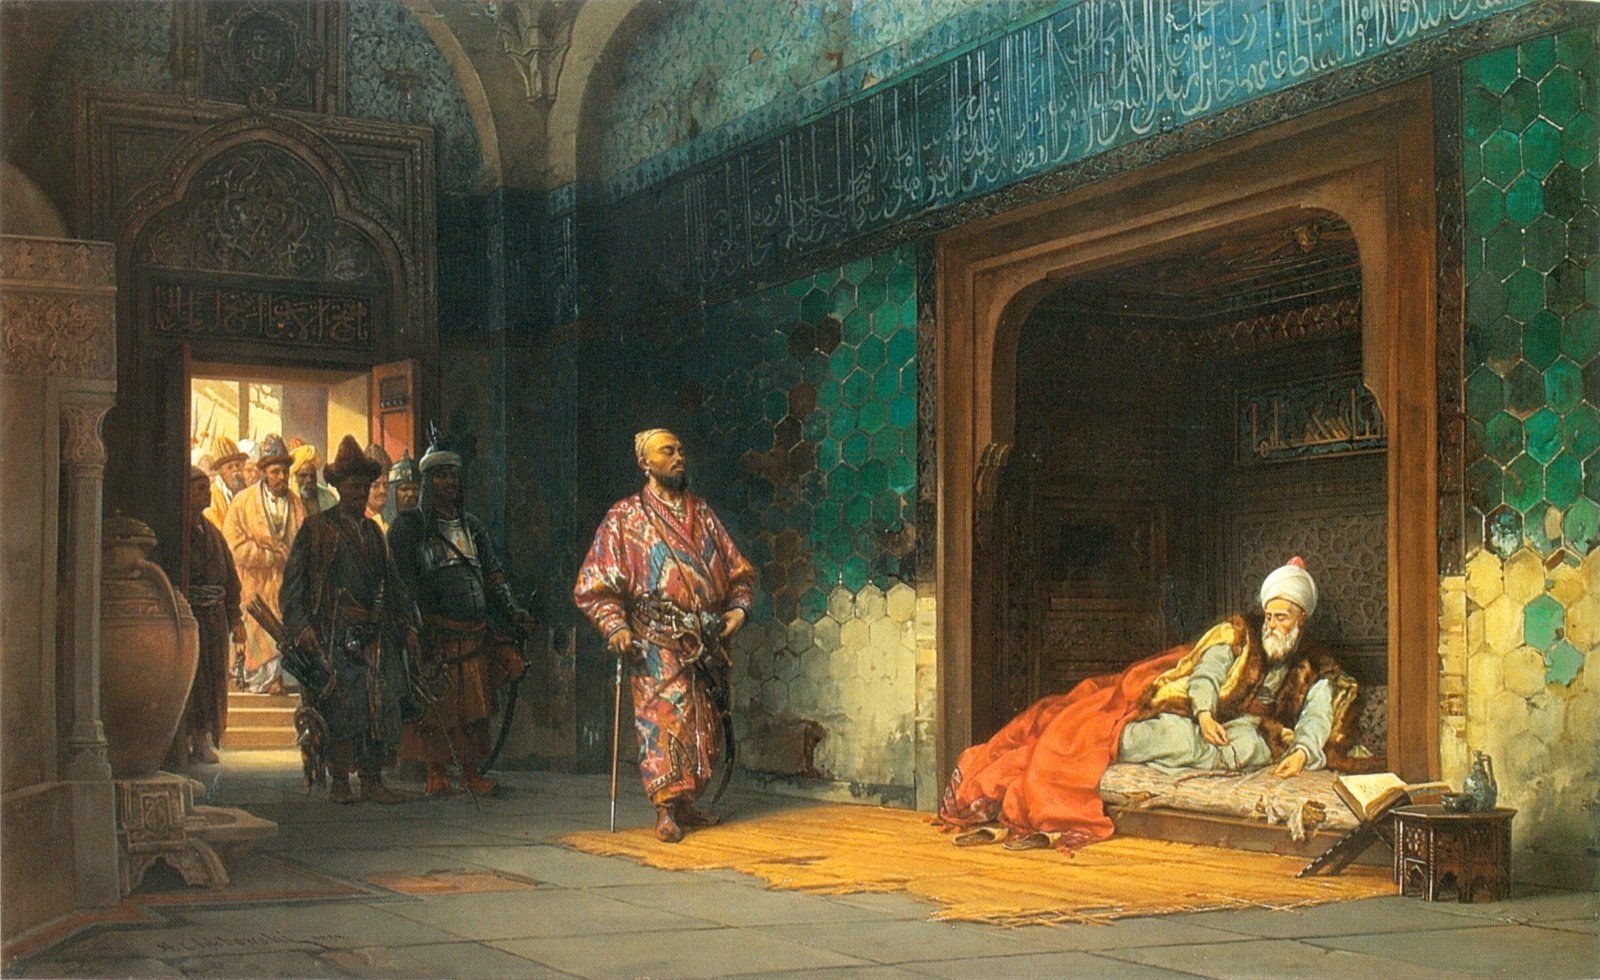 painting, History, Royal, Prisons, Classic art, Islamic architecture